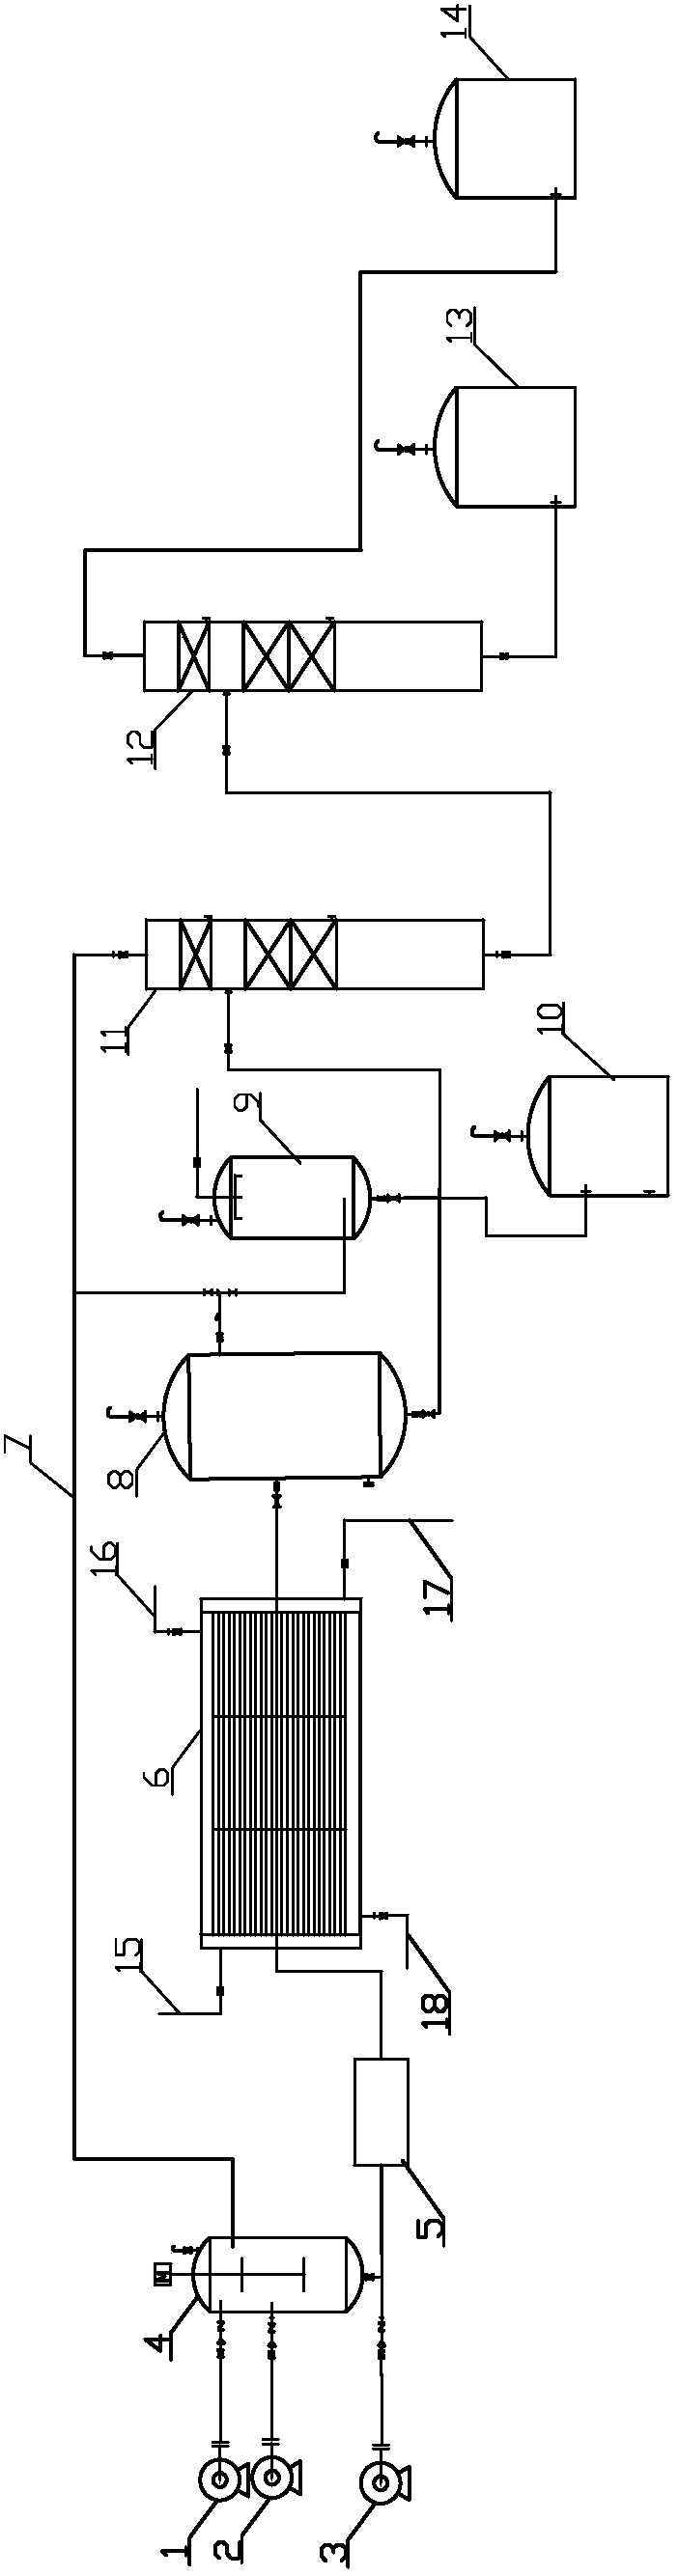 Technology and device for preparing chloroacetic acid through catalytic chlorination by means of micro-channel reactor